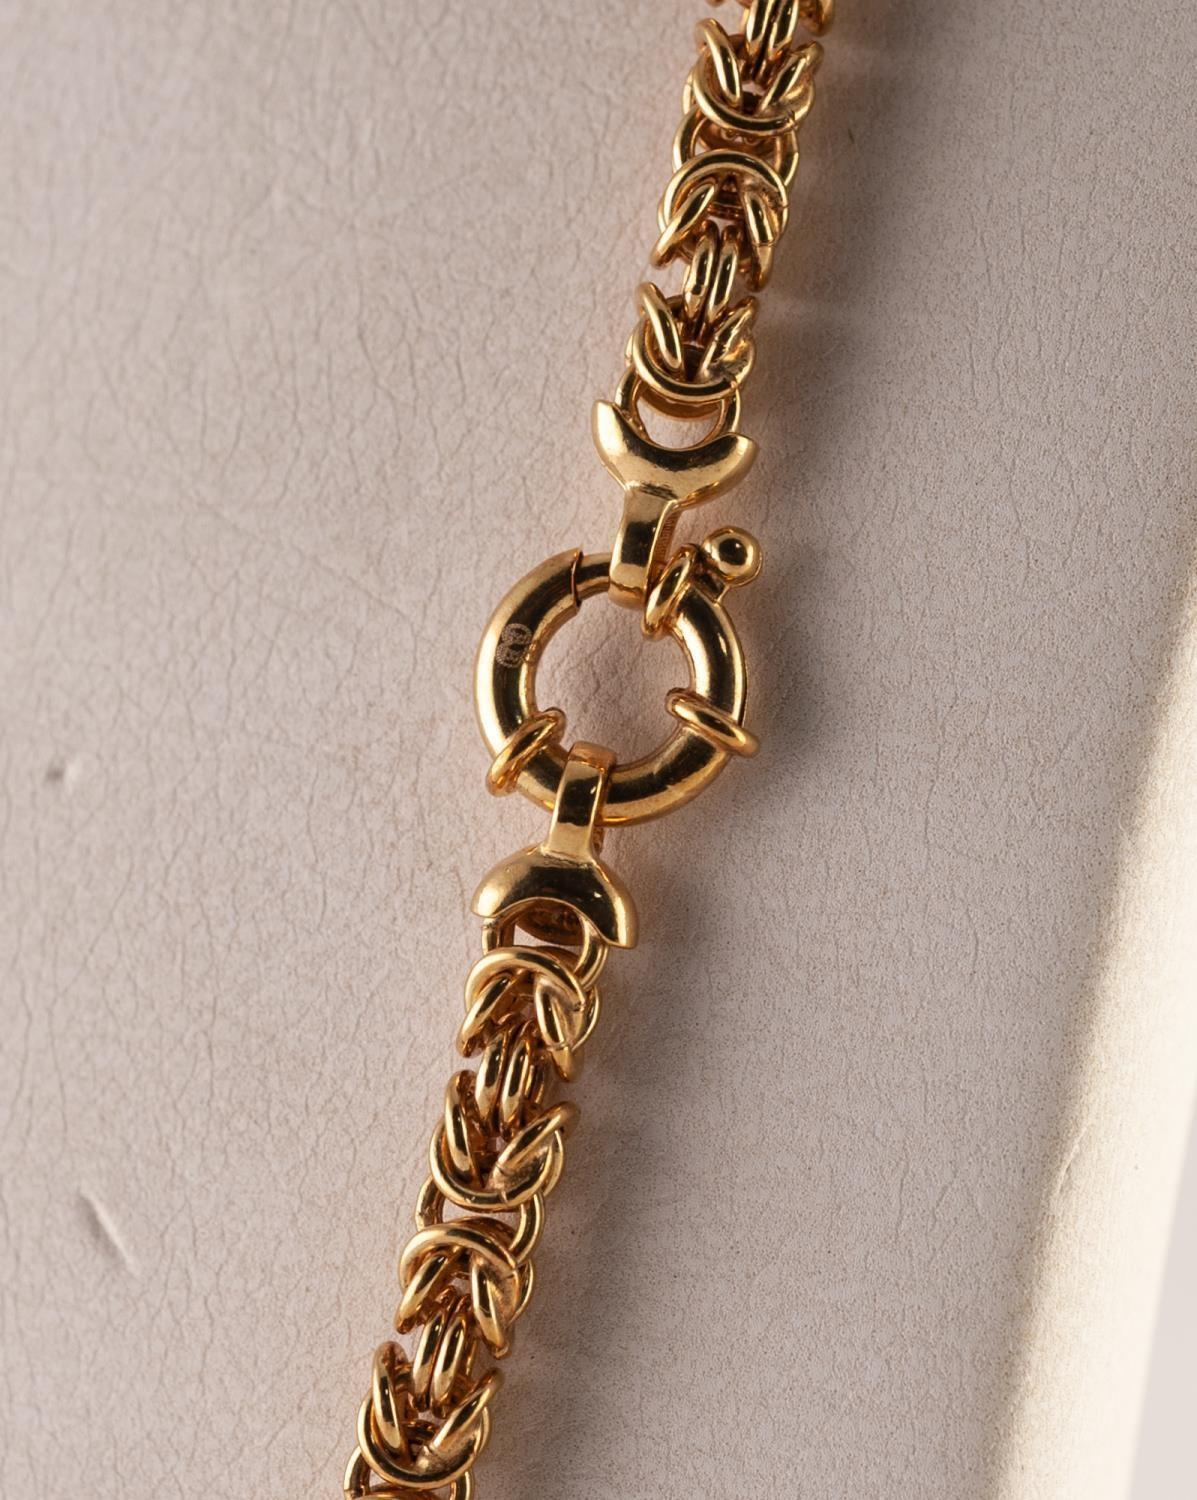 9ct GOLD MULTI-LINK ROPE CHAIN NECKLACE, with ring clasp, 23 1/2in (60cm) long, 25.6 gms - Image 3 of 3